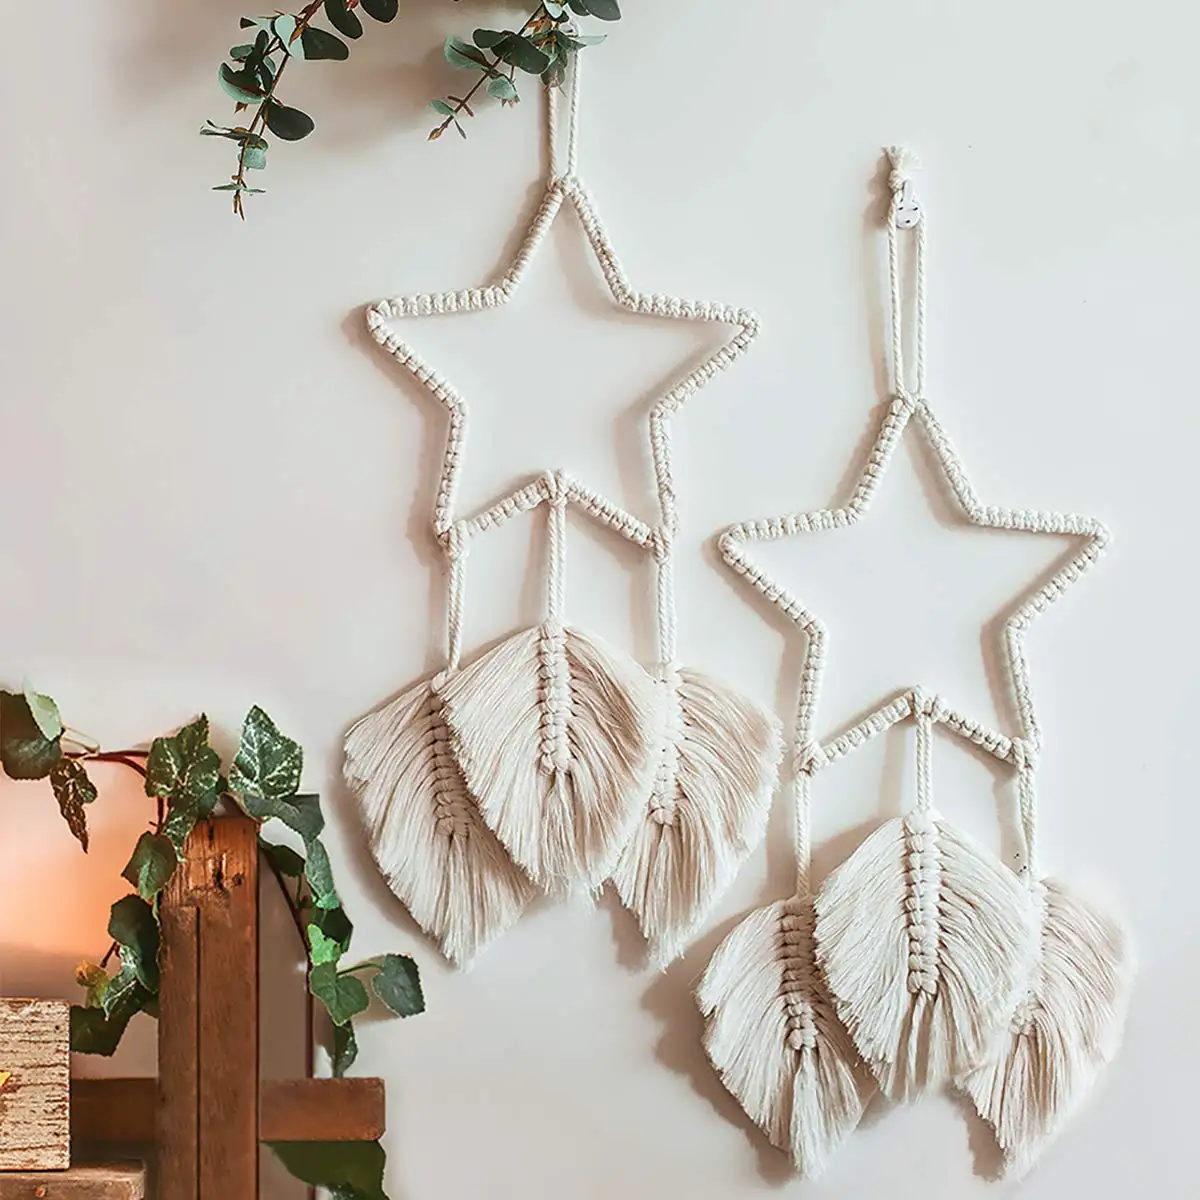 Macrame Wall Hanging Feather Boho Chic Handmade Woven Leaf Tassels Party Wall Decorations Woven Dream Catcher Wall Decor Art